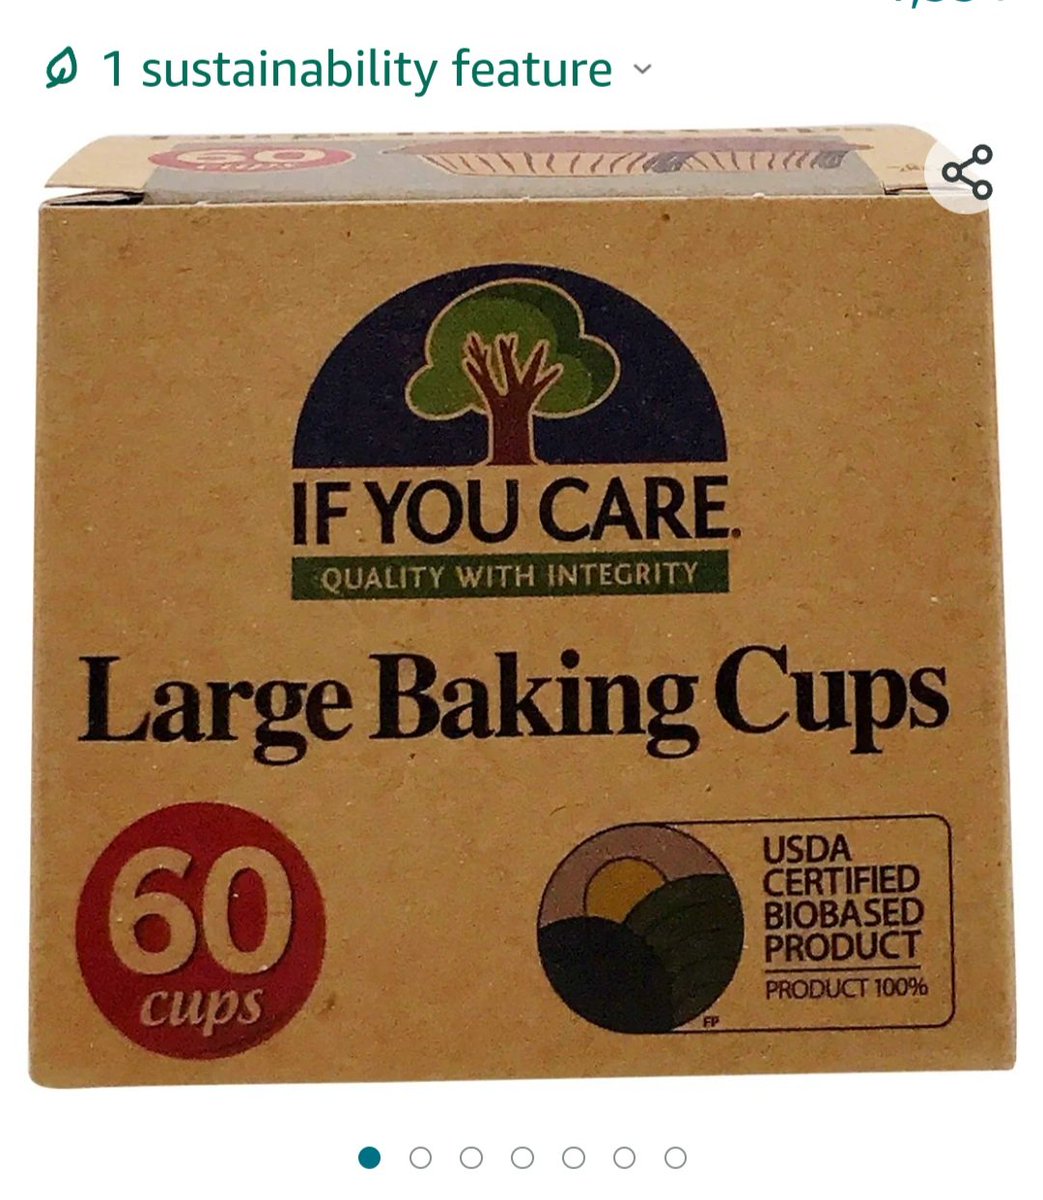 New passive aggressive baking cups just dropped: